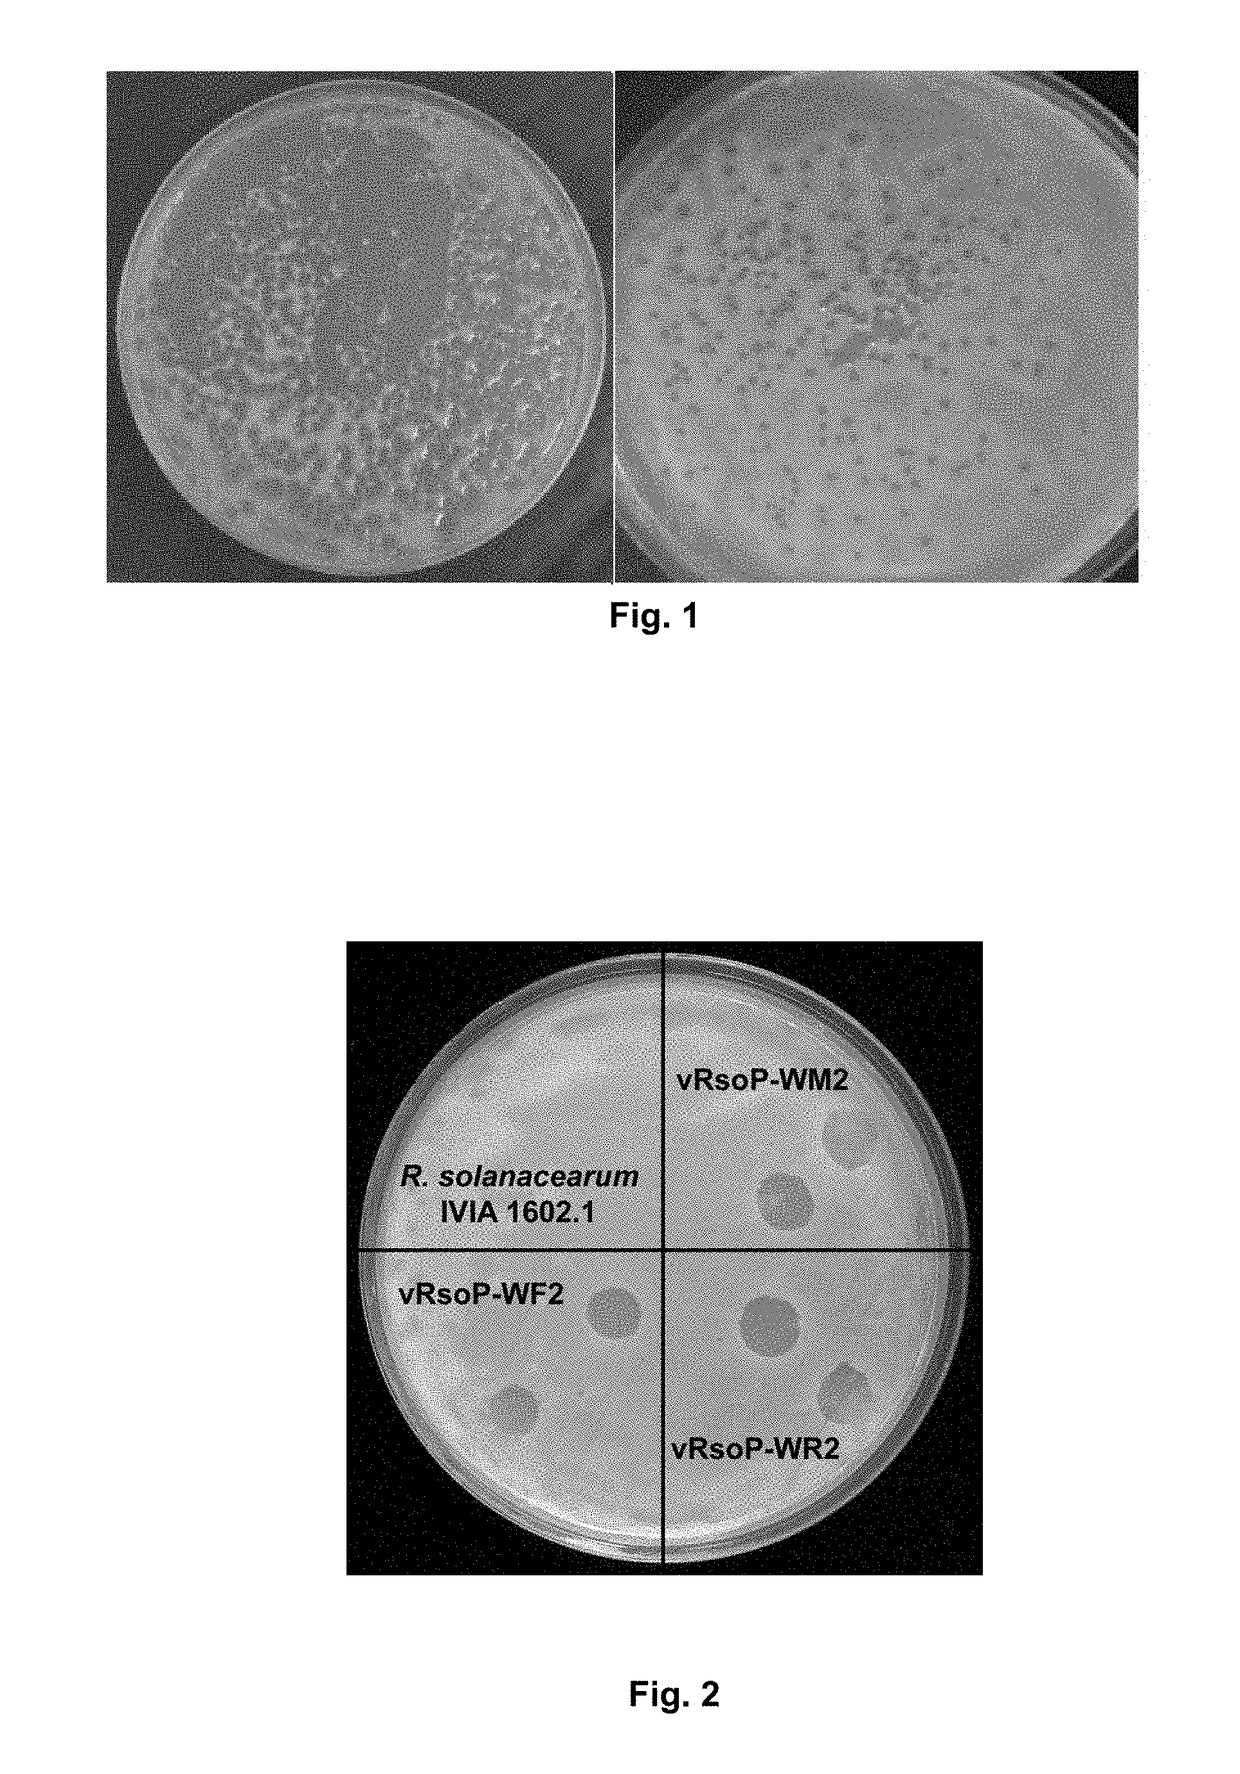 Method for the prevention and/or the biological control of bacterial wilt caused by ralstonia solanacearum, via the use of bacteriophages suitable for this purpose and compositions thereof